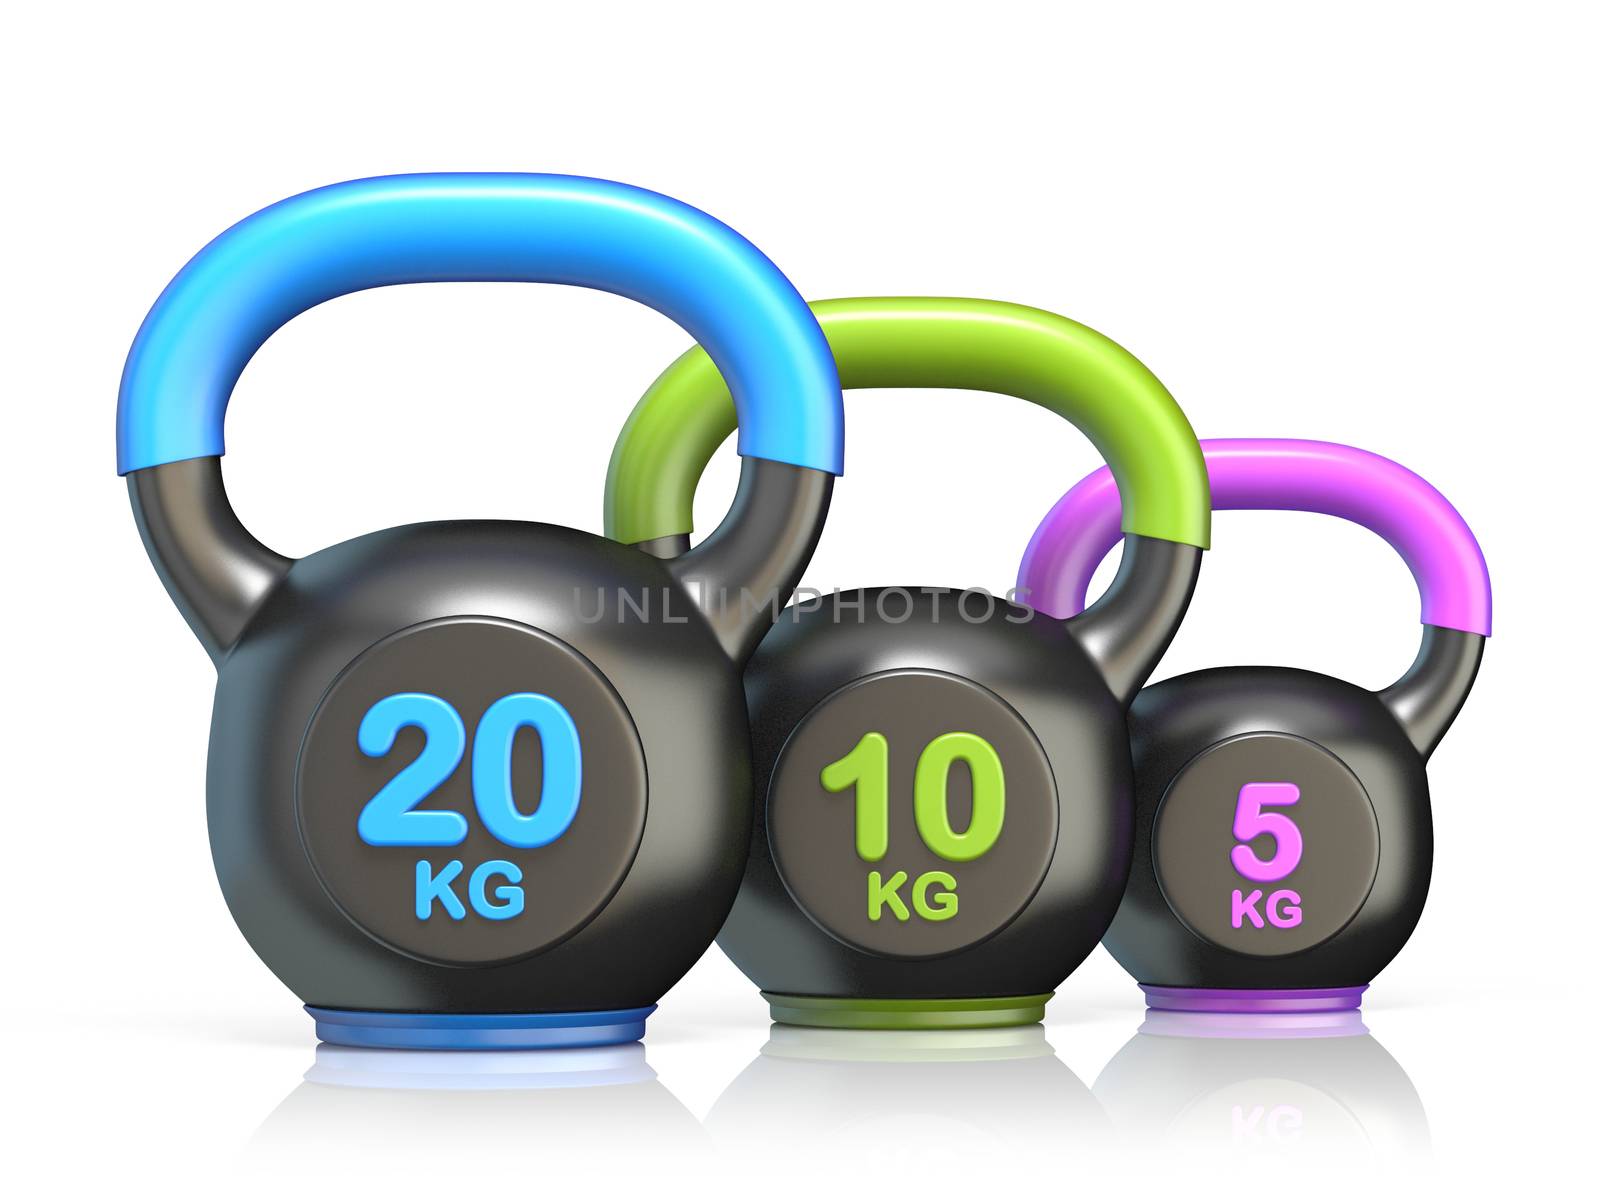 Three kettle bells 3D render illustration isolated on white background